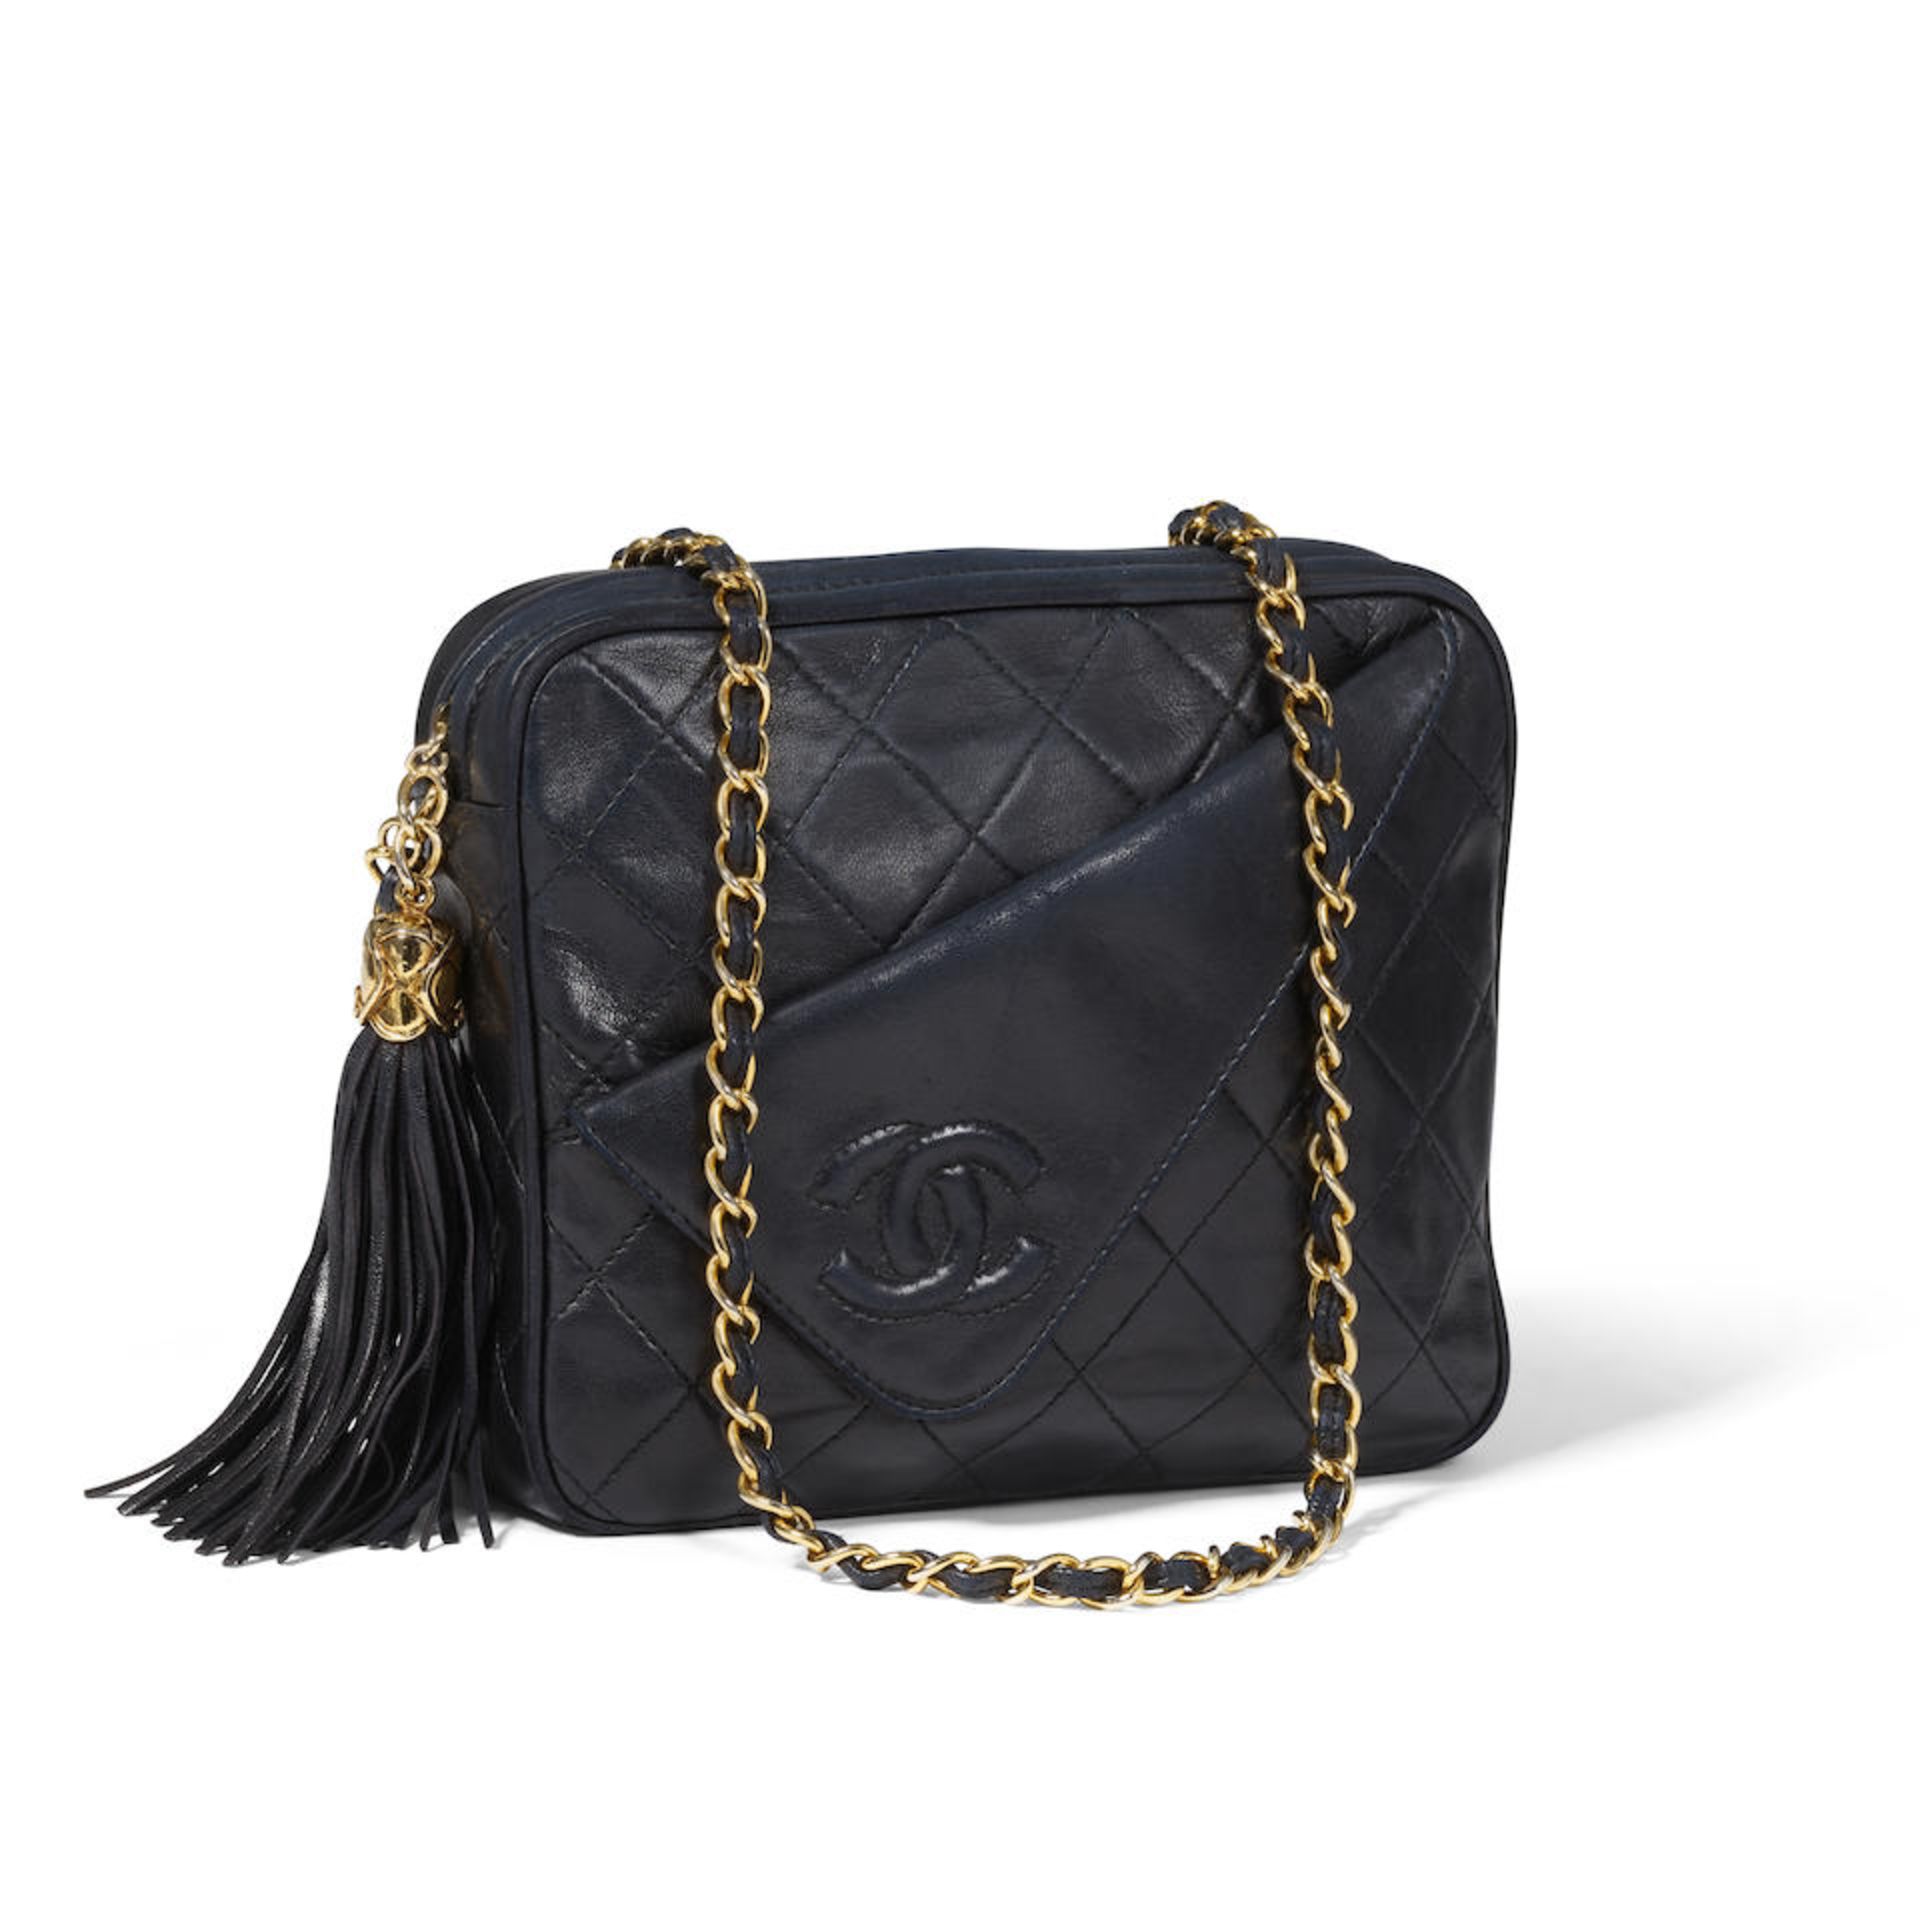 CHANEL: QUILTED TASSEL CAMERA BAG 1989-1991